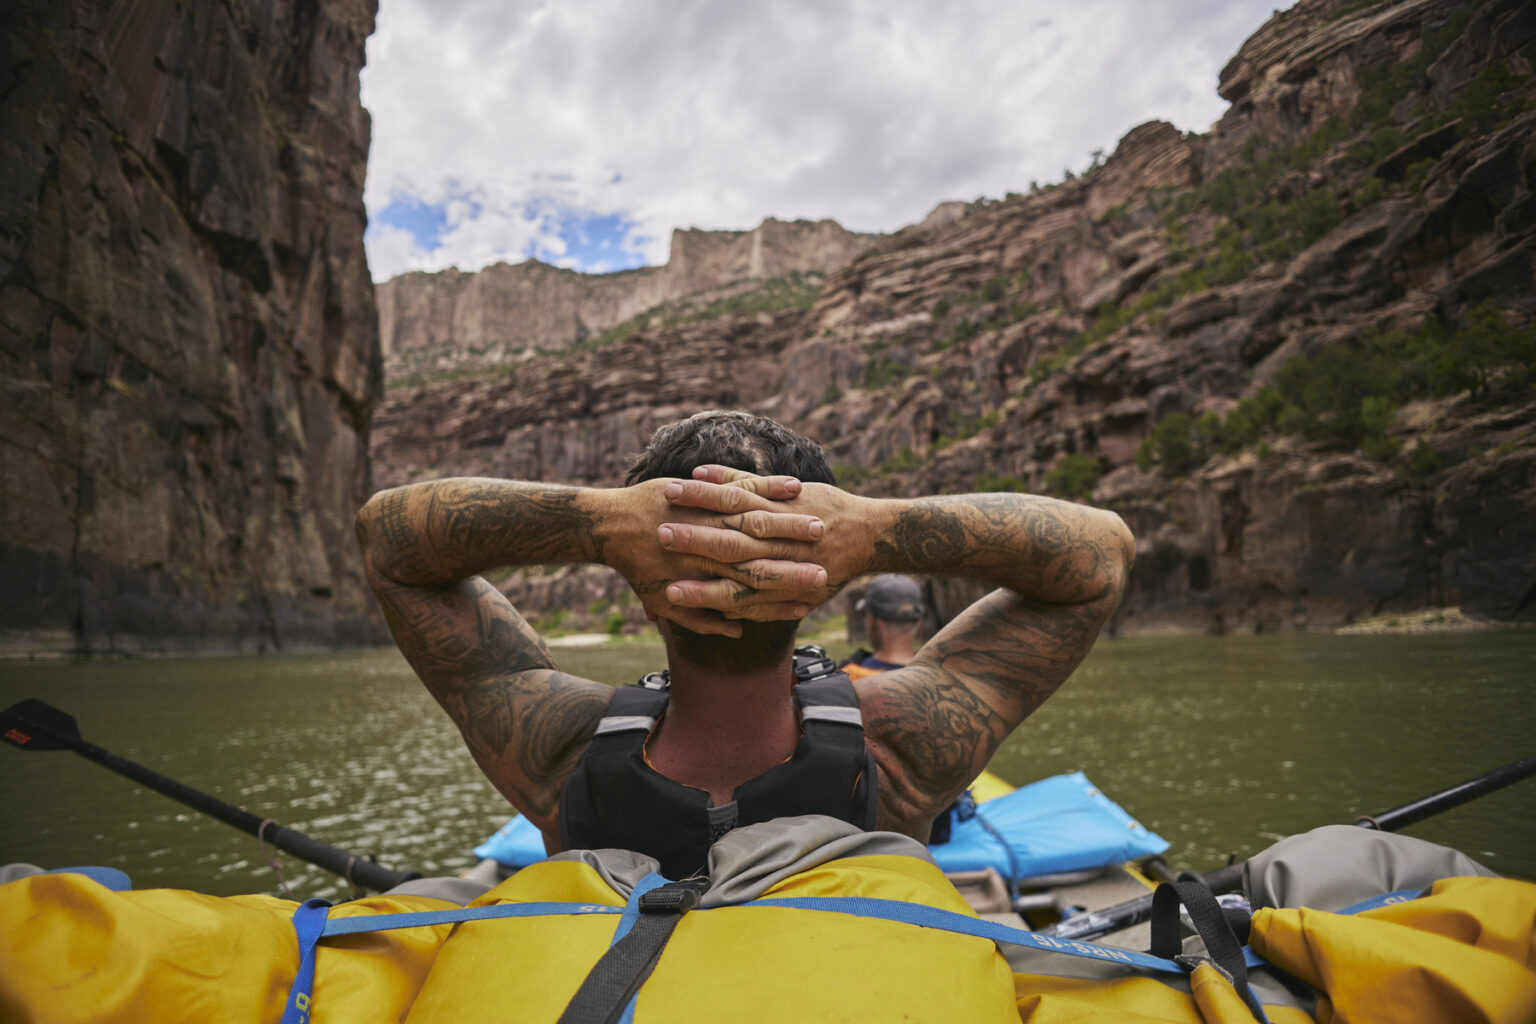 A tattooed guide leans back cradling the back of his head in his hands and takes in the beauty of the Gates of Lodore on the Green River in Utah.